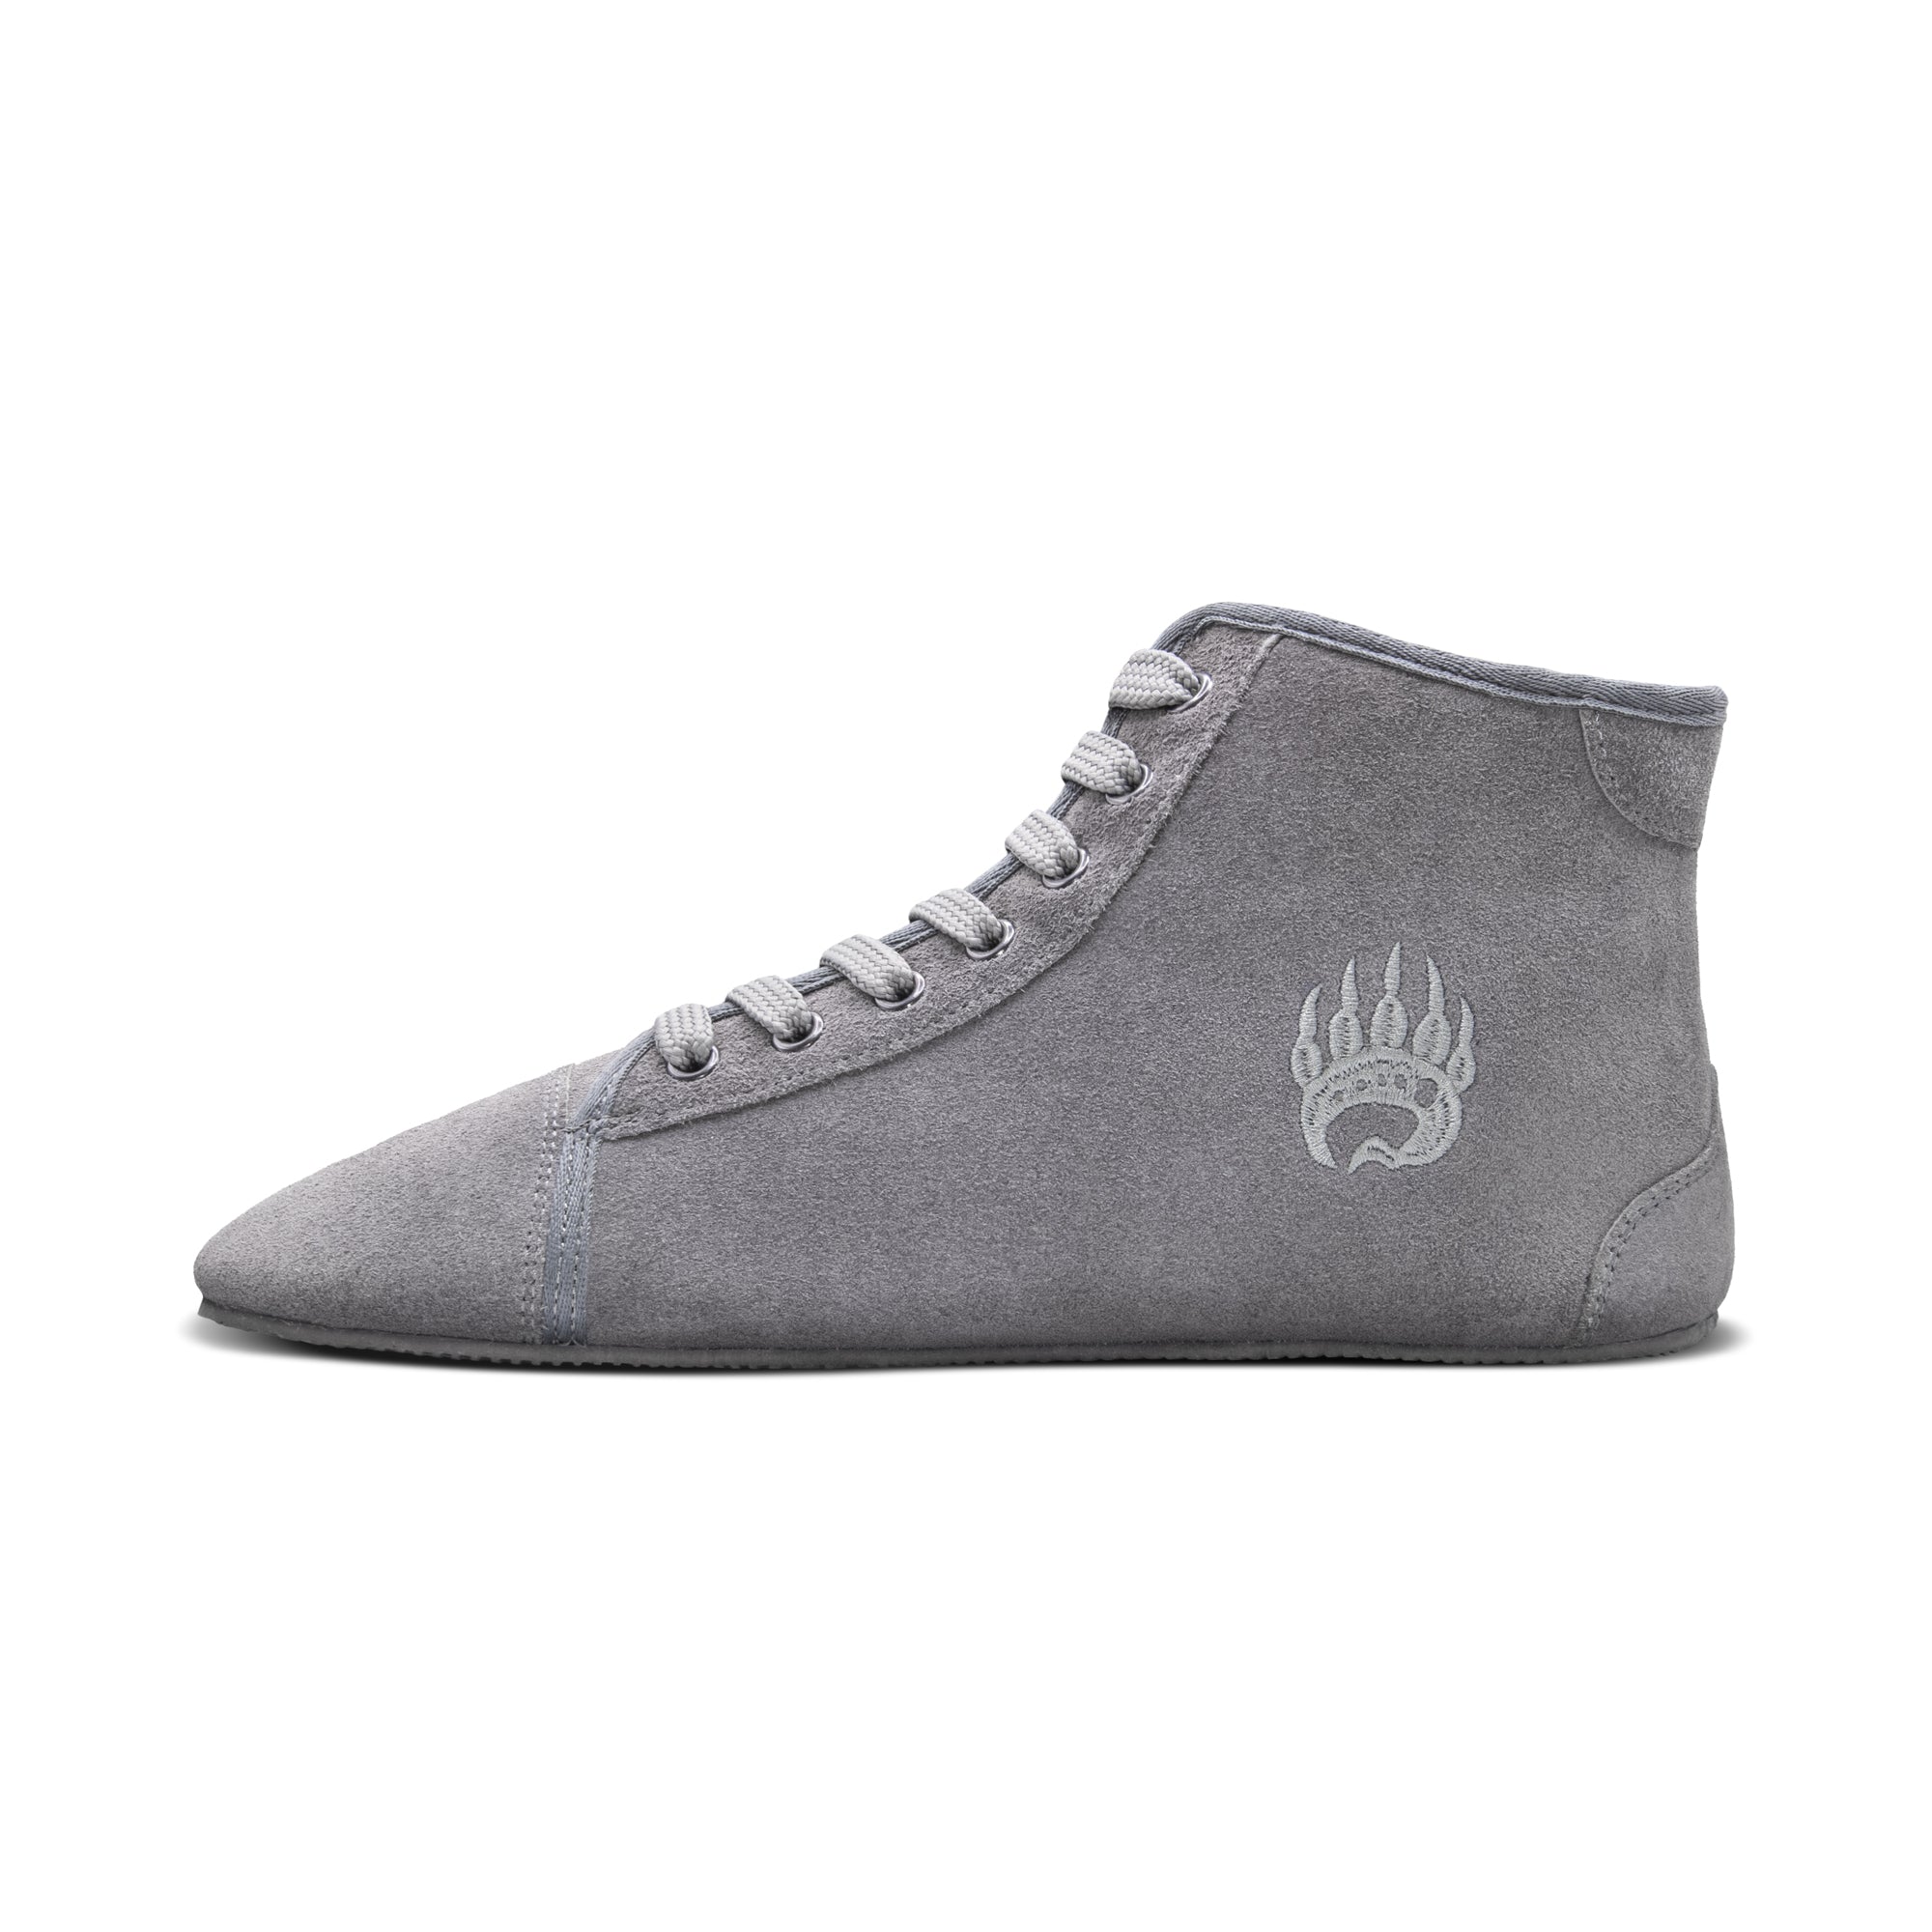 A single light gray Bearfoot Ursus Suede High-Top training sneaker with a black sole and multiple laces. The sneaker features a minimalist bear paw logo on the side, ideal for